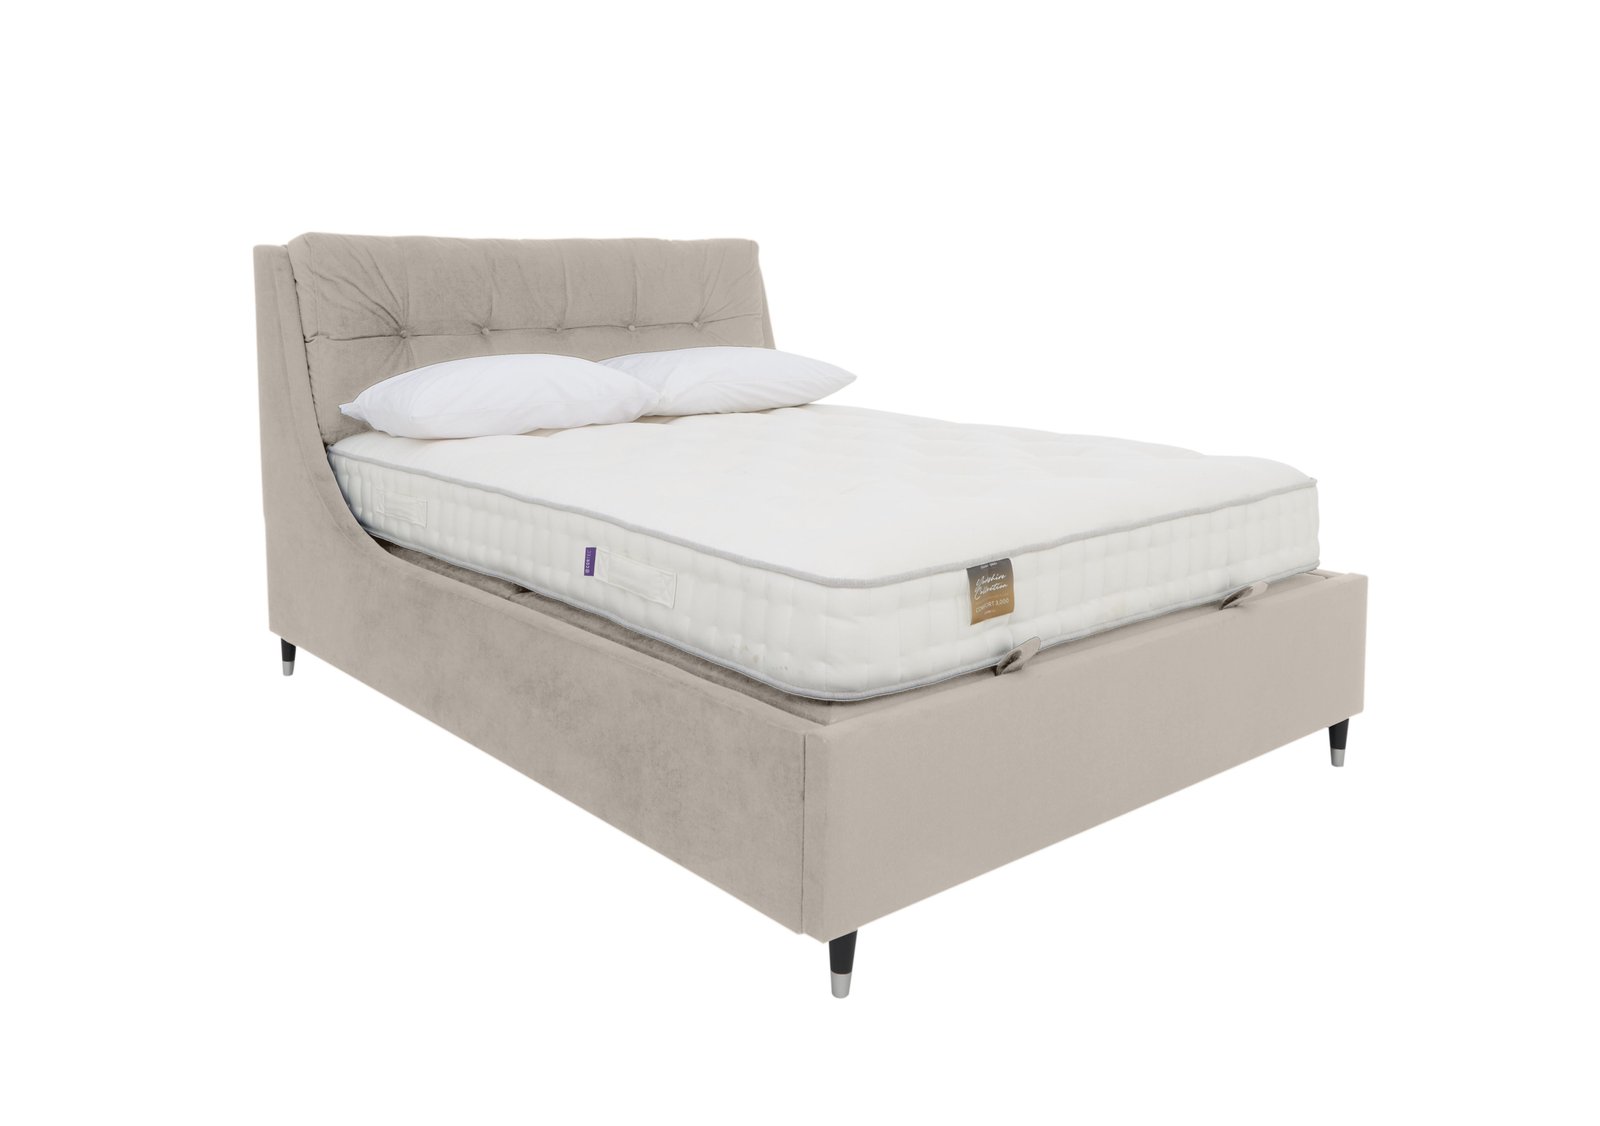 Javier Ottoman Bed Frame in Smooth Stone on Furniture Village